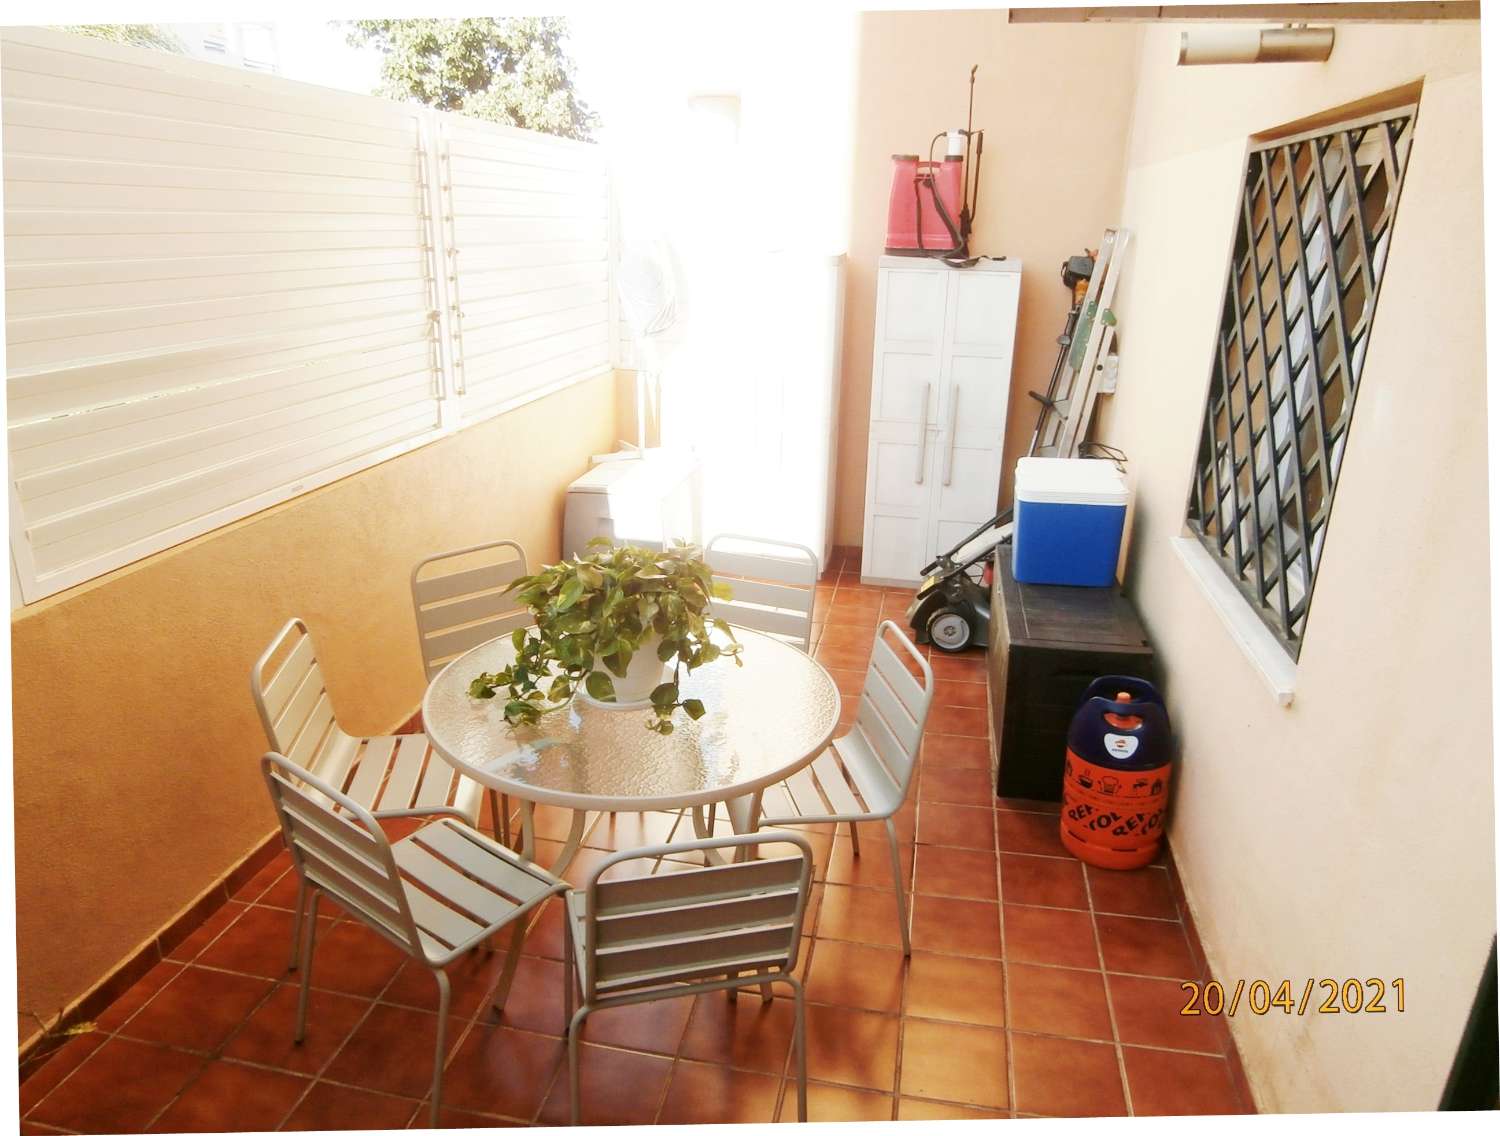 Excellent ground floor apartment with large garden for sale located in the area of Cancelada Estepona, 13 km from Puerto Banus.